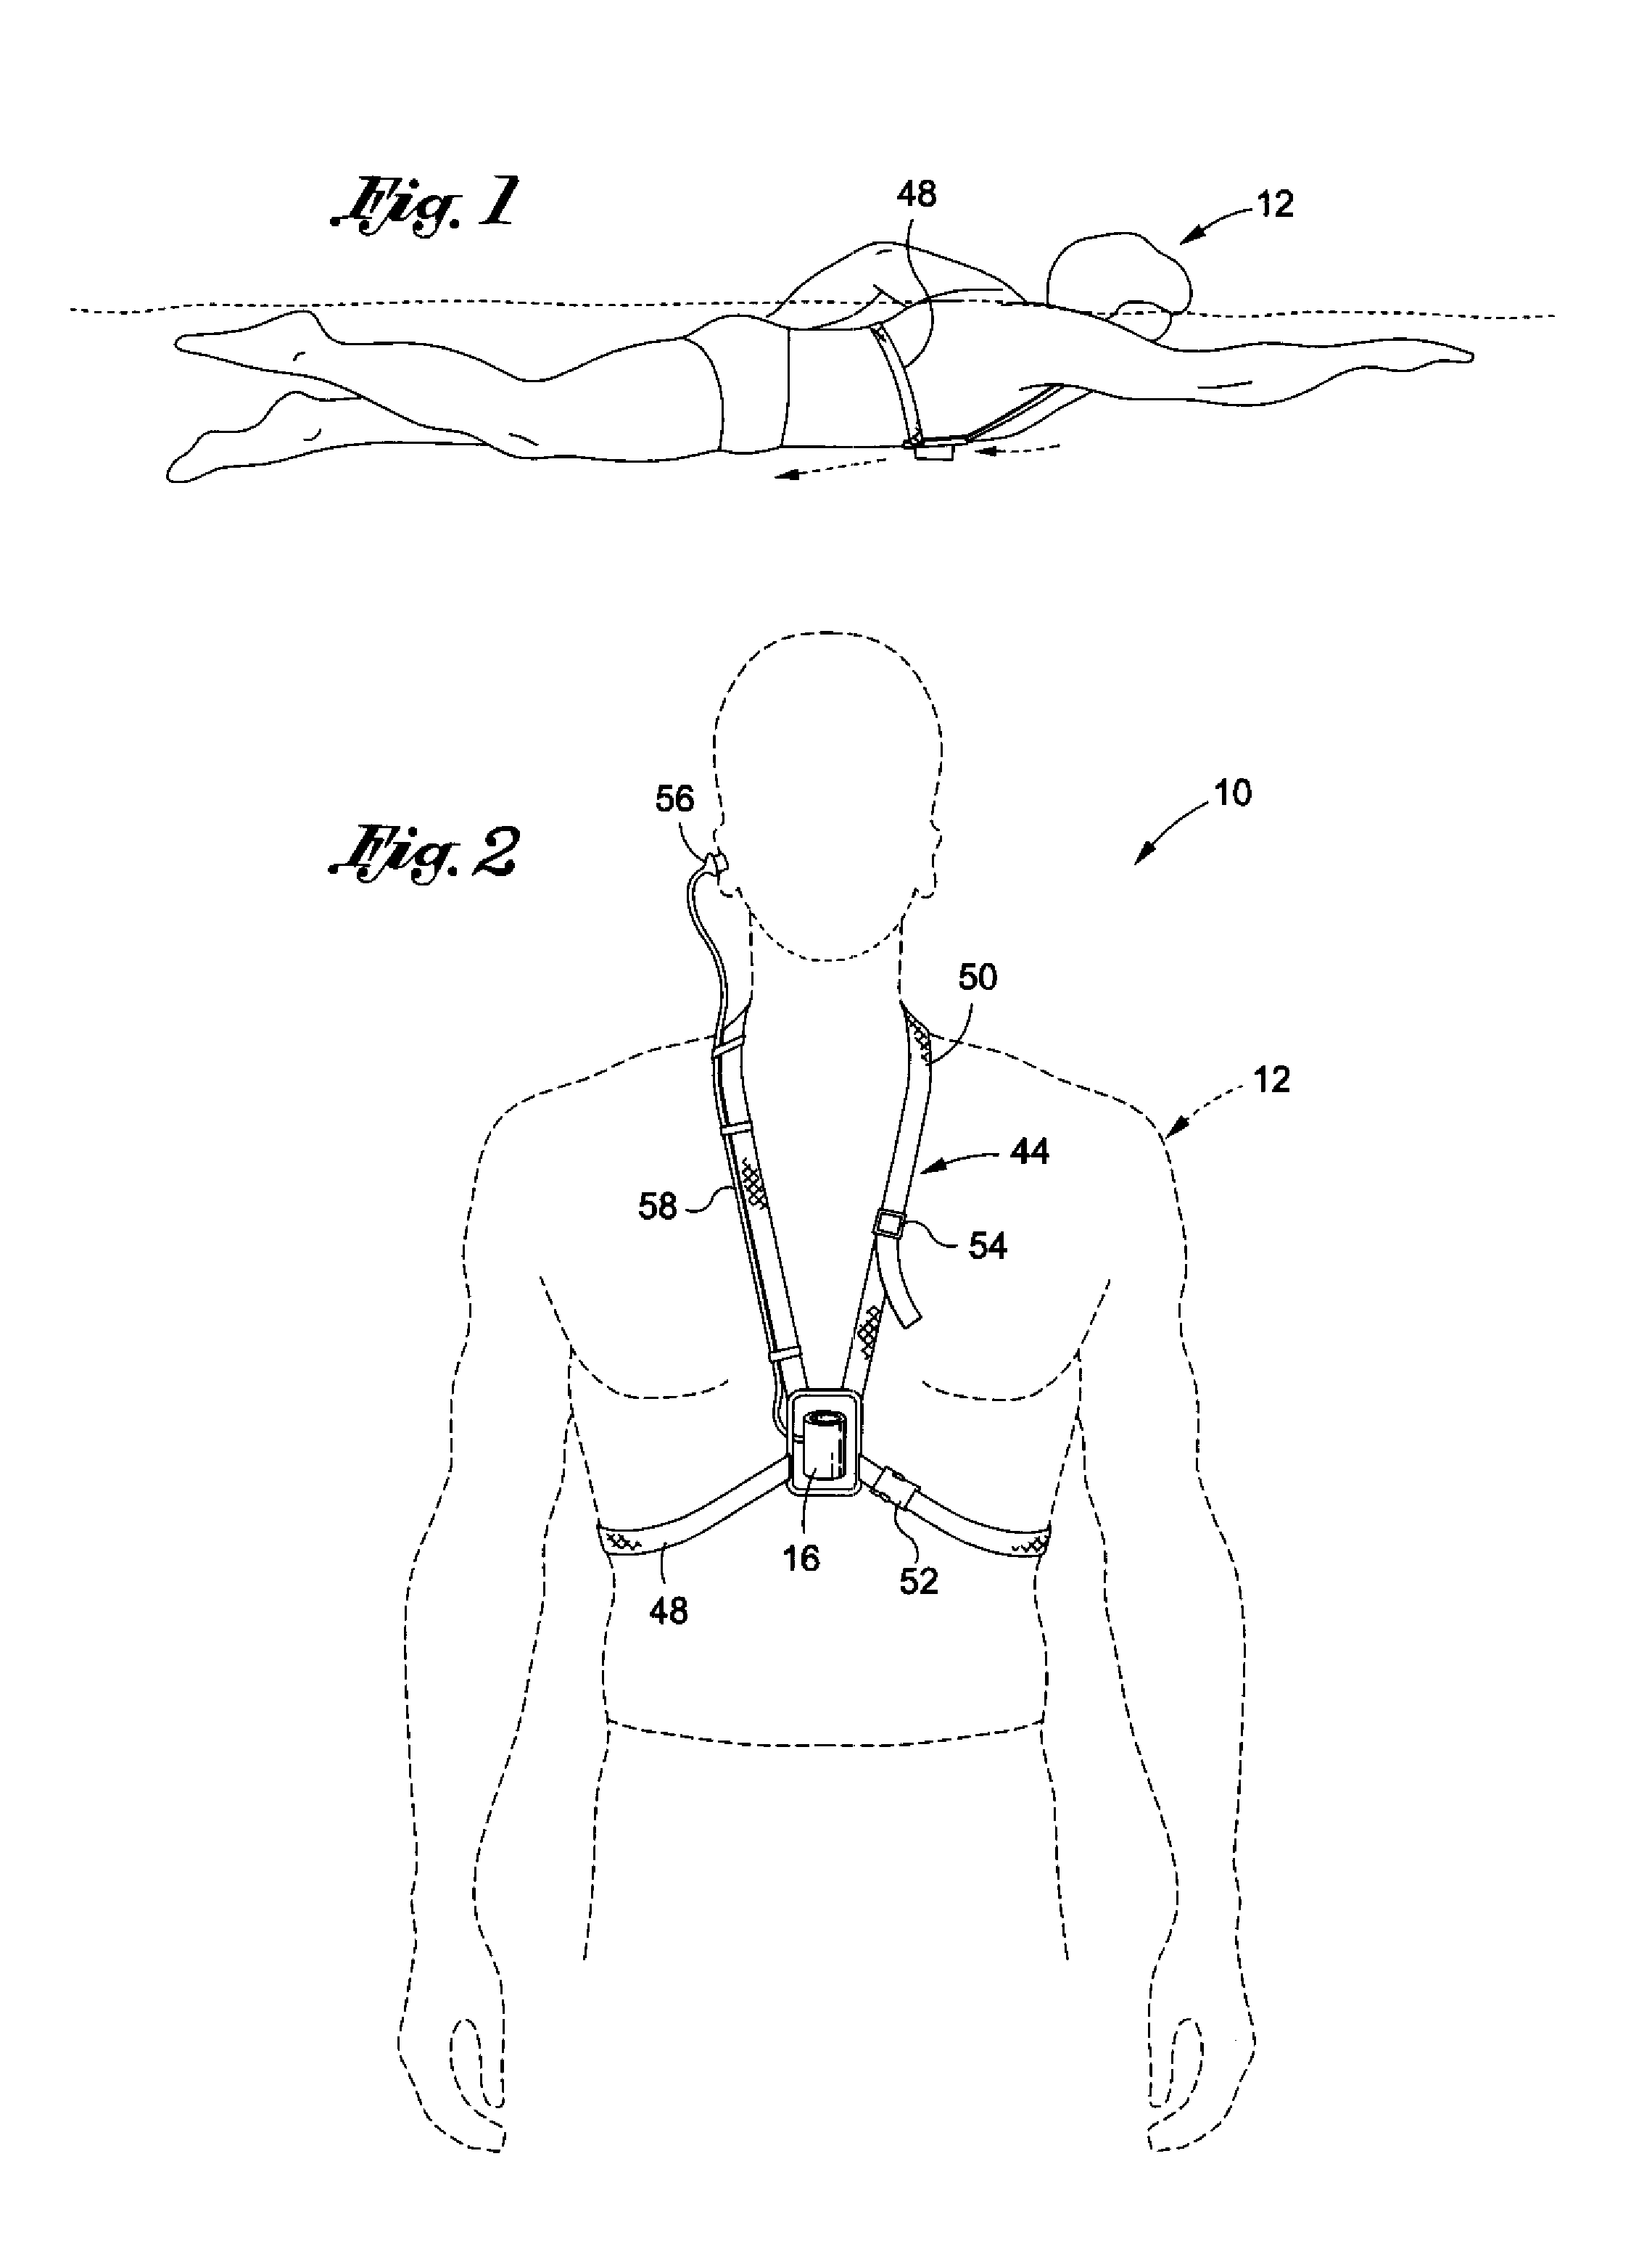 Auditory feedback device and method for swimming speed